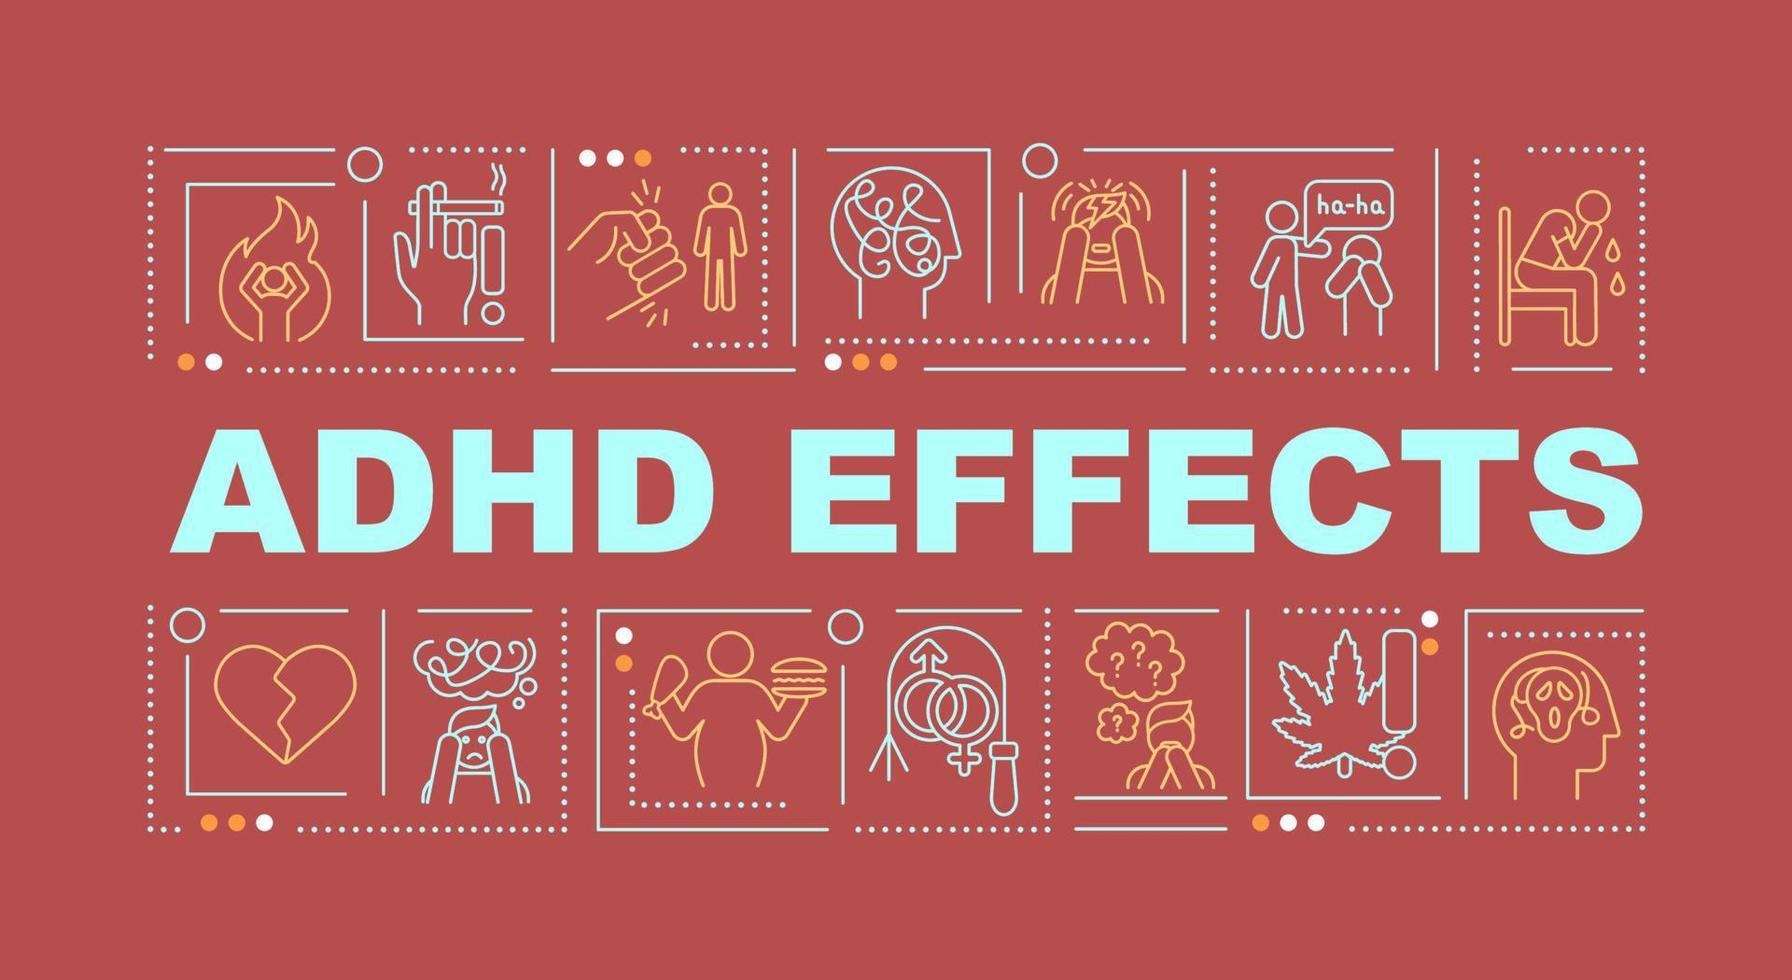 ADHD effects word concepts banner. Weight problems. Impulsive behavior. Infographics with linear icons on red background. Isolated creative typography. Vector outline color illustration with text